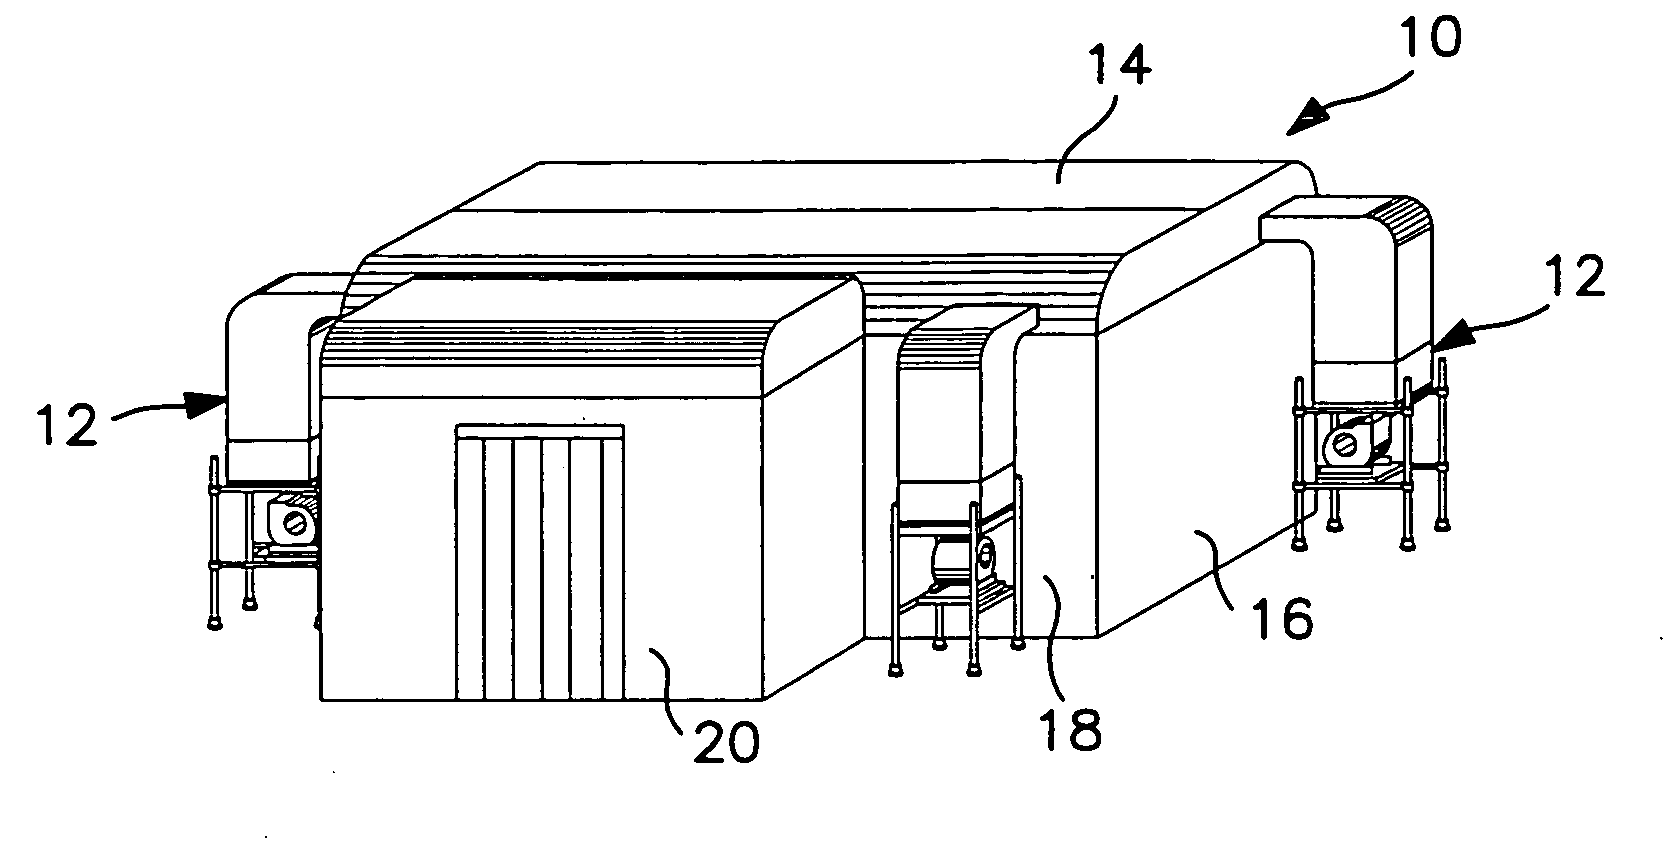 Method of minimizing cross contamination between clean air rooms in a common enclosure